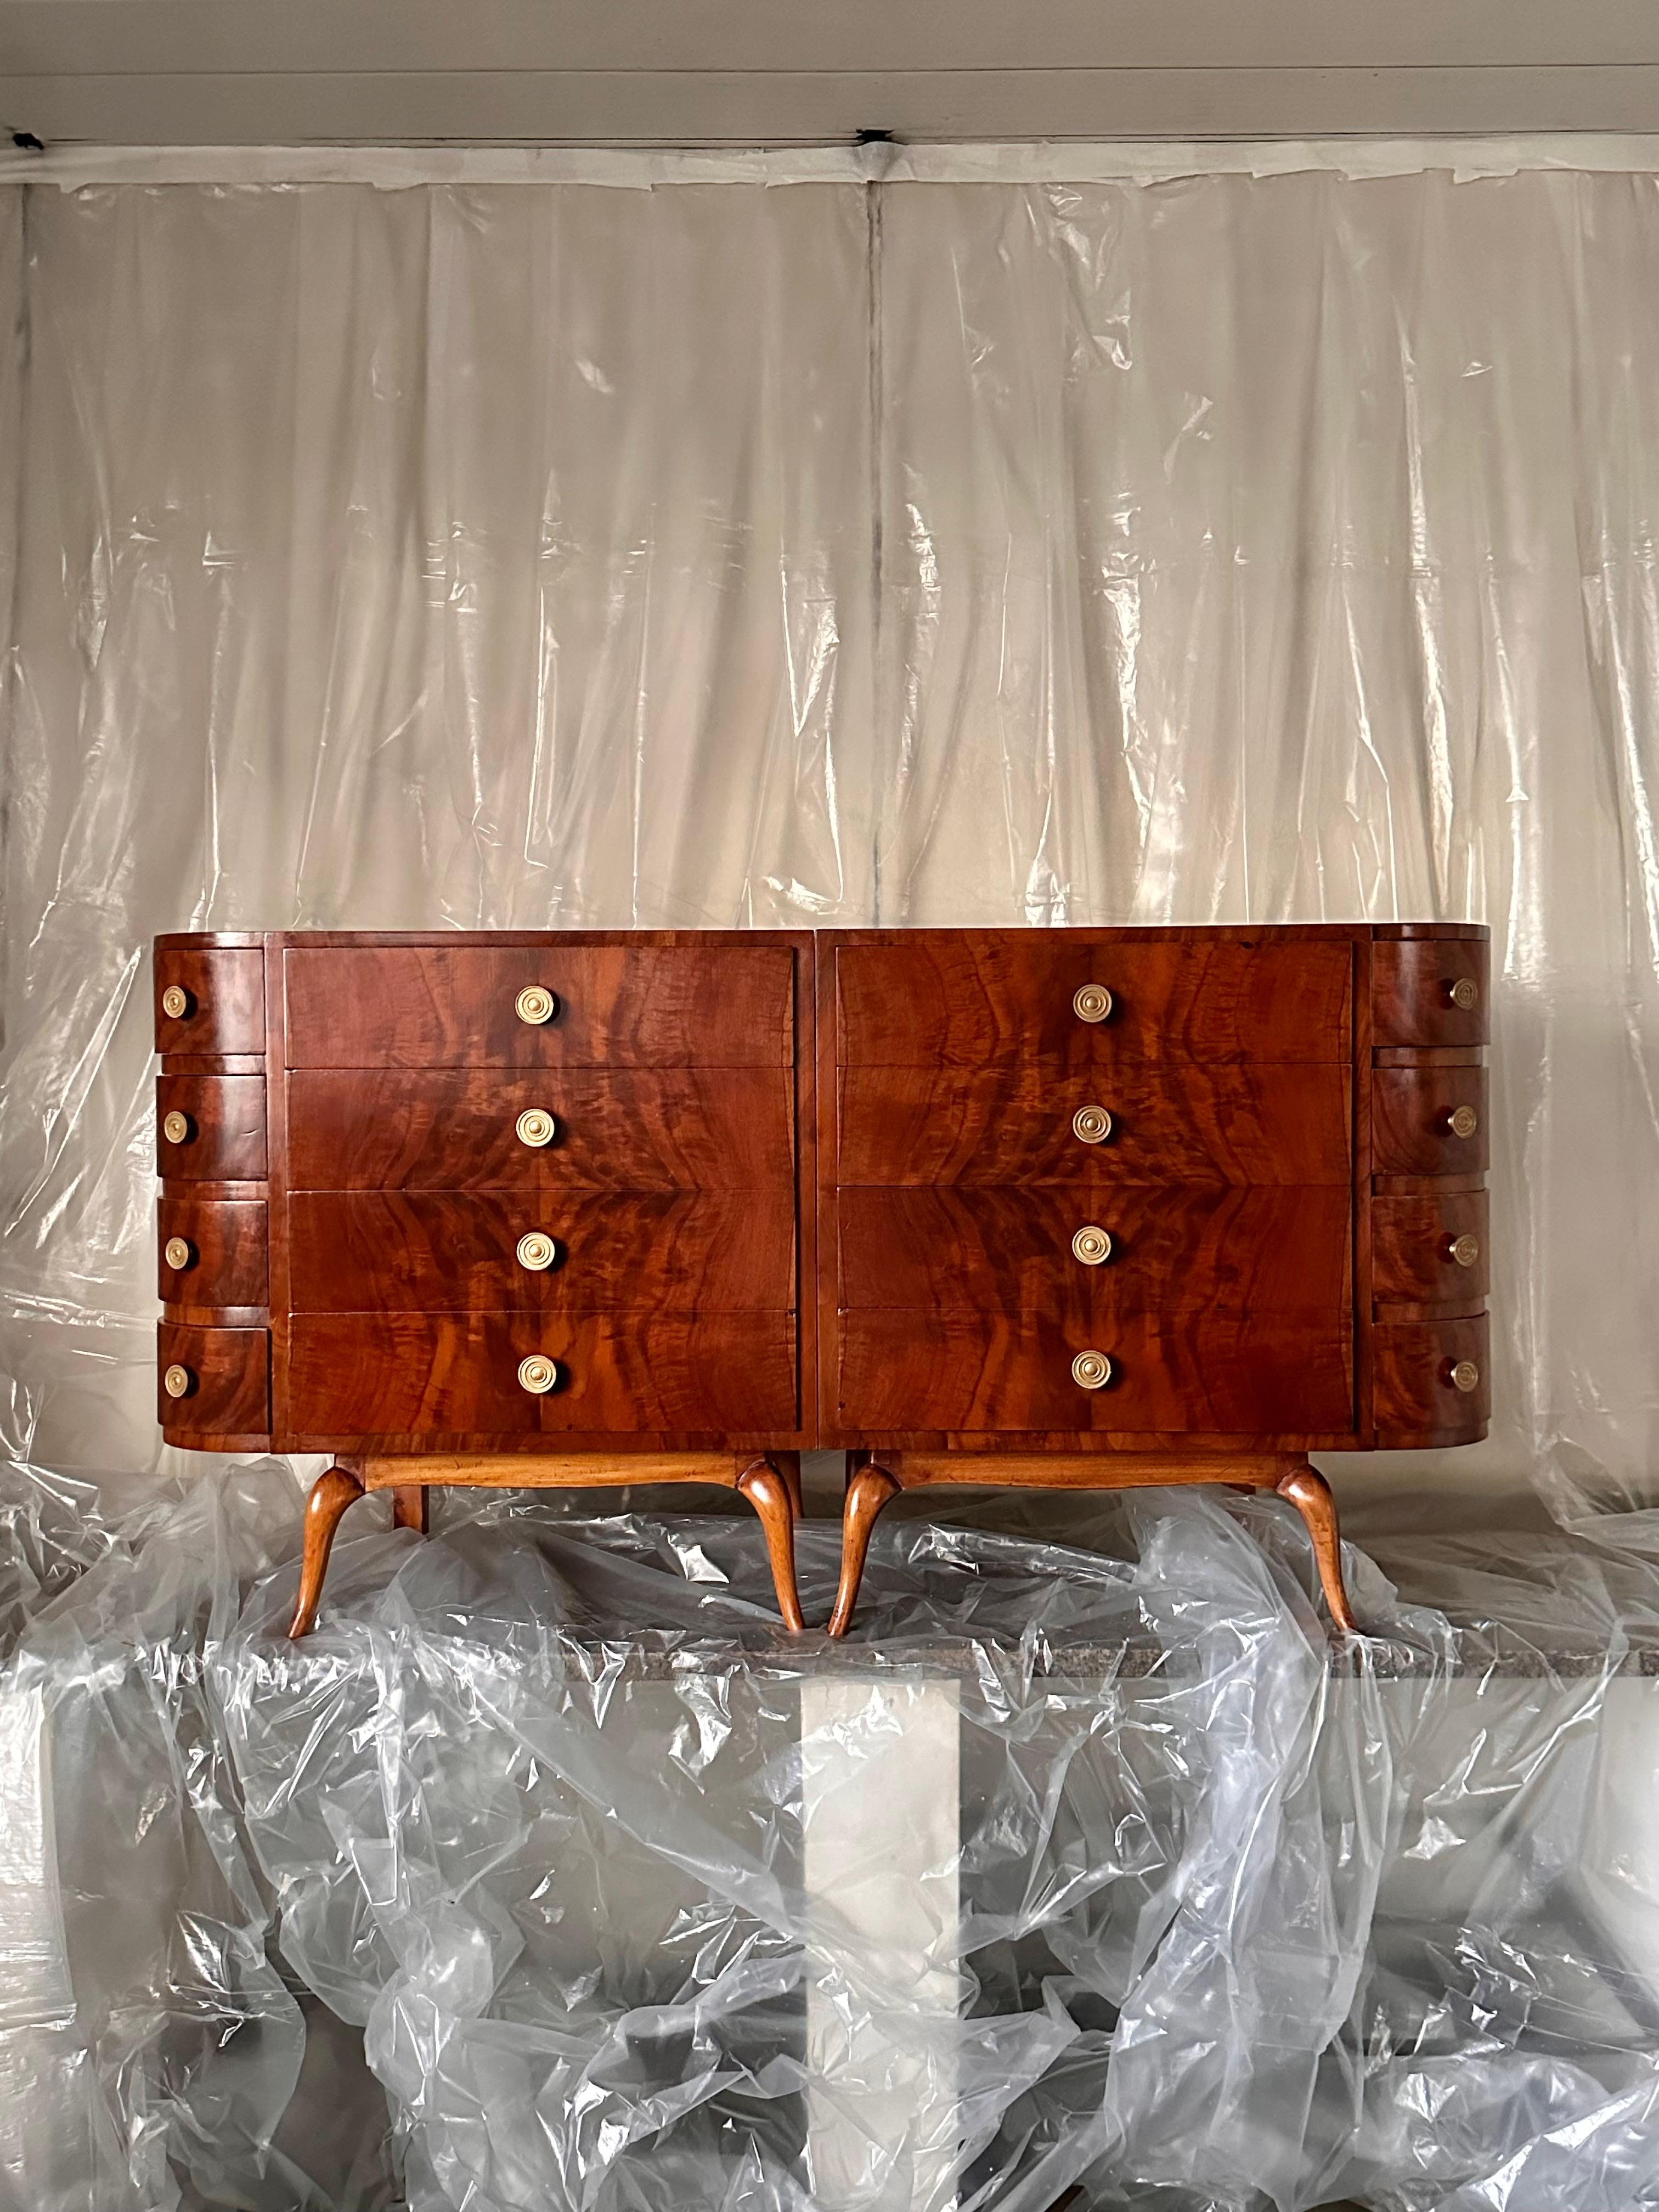 A pair of beautiful sideboards in caviúna wood, a Brazilian wood also known as 